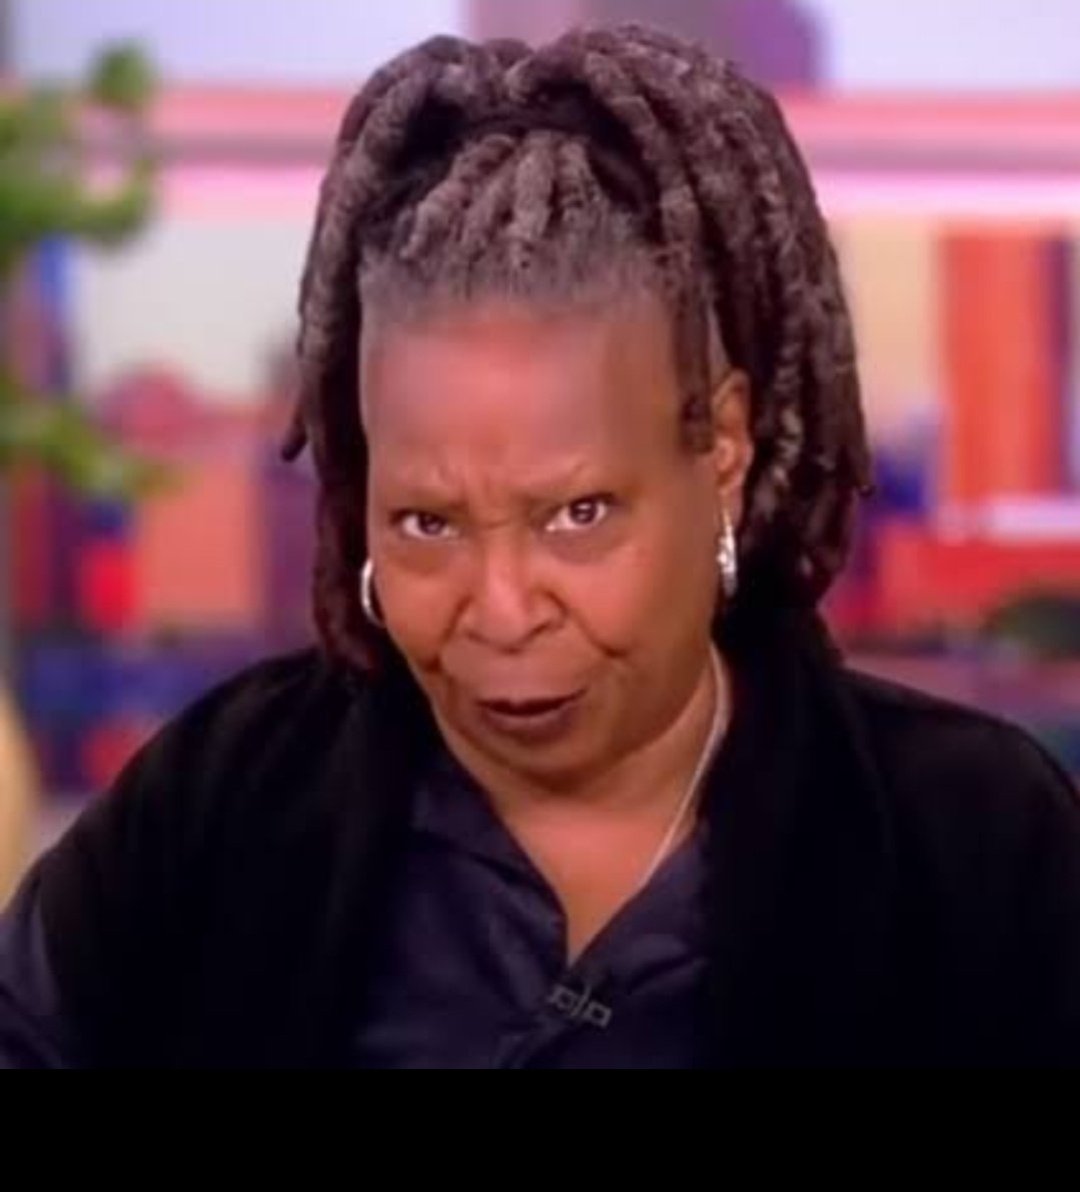 Who thinks Whoopi Goldberg is a complete shit-bag?